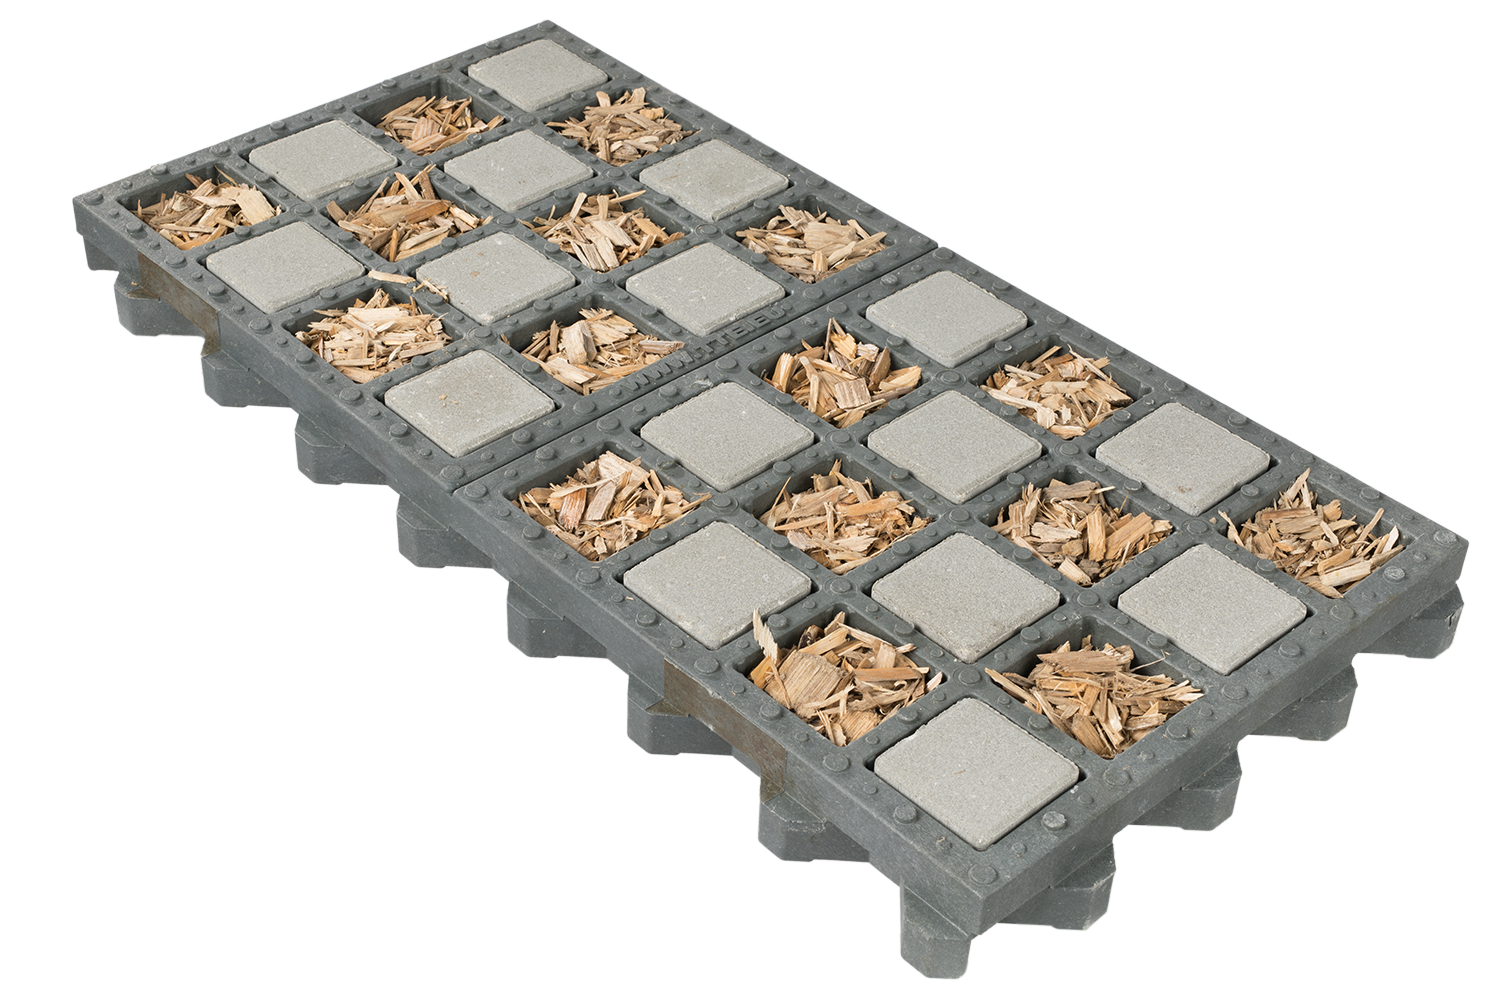 TTE® with paving stones and wood chips